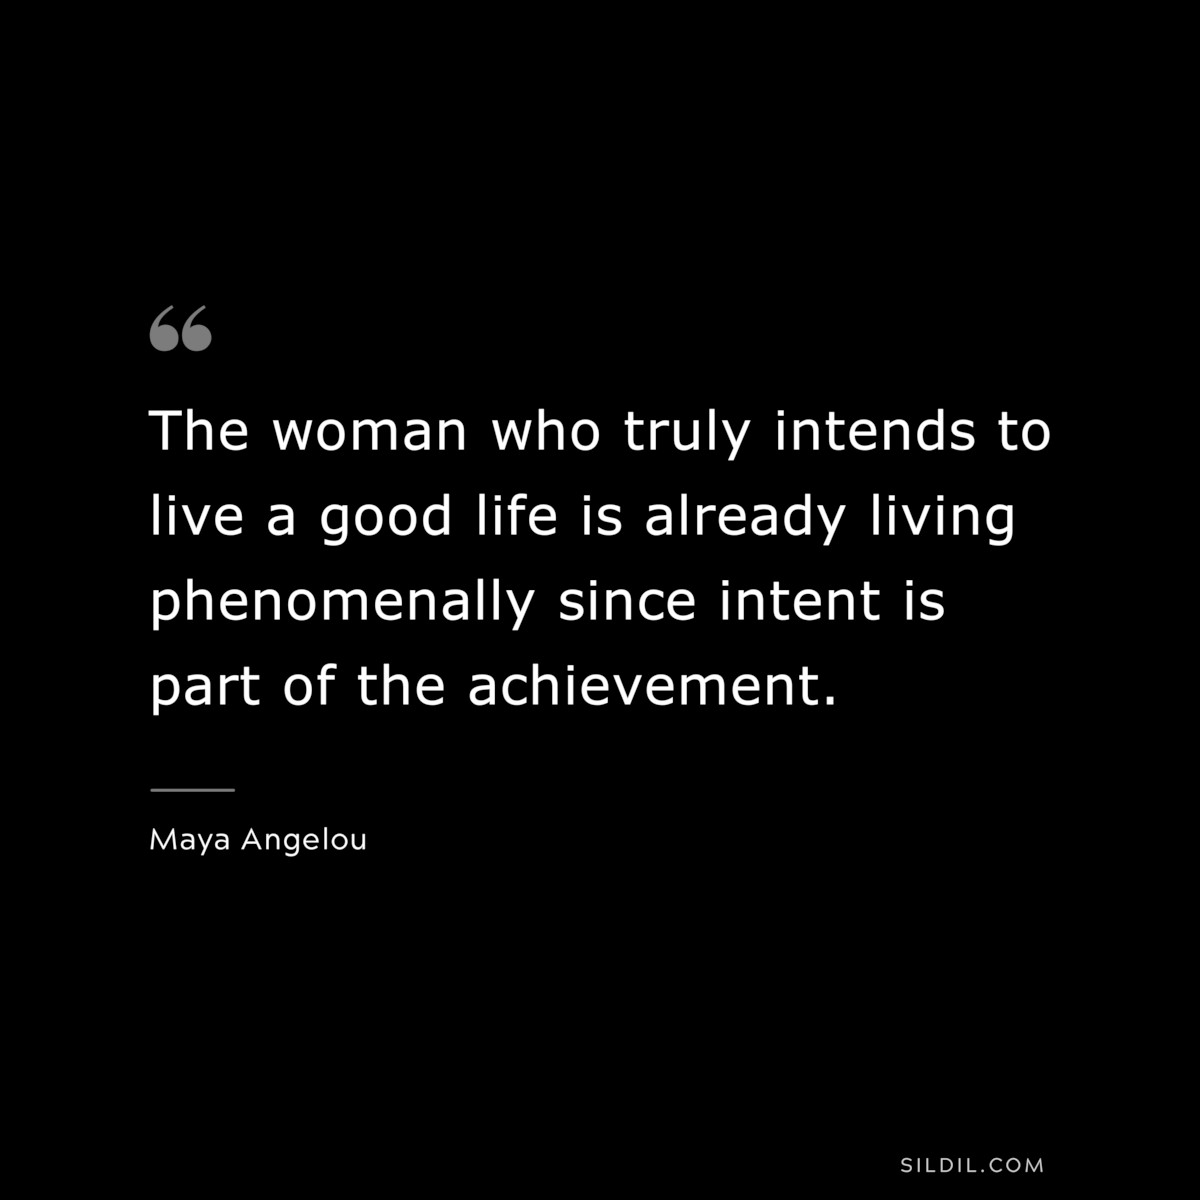 The woman who truly intends to live a good life is already living phenomenally since intent is part of the achievement. ― Maya Angelou